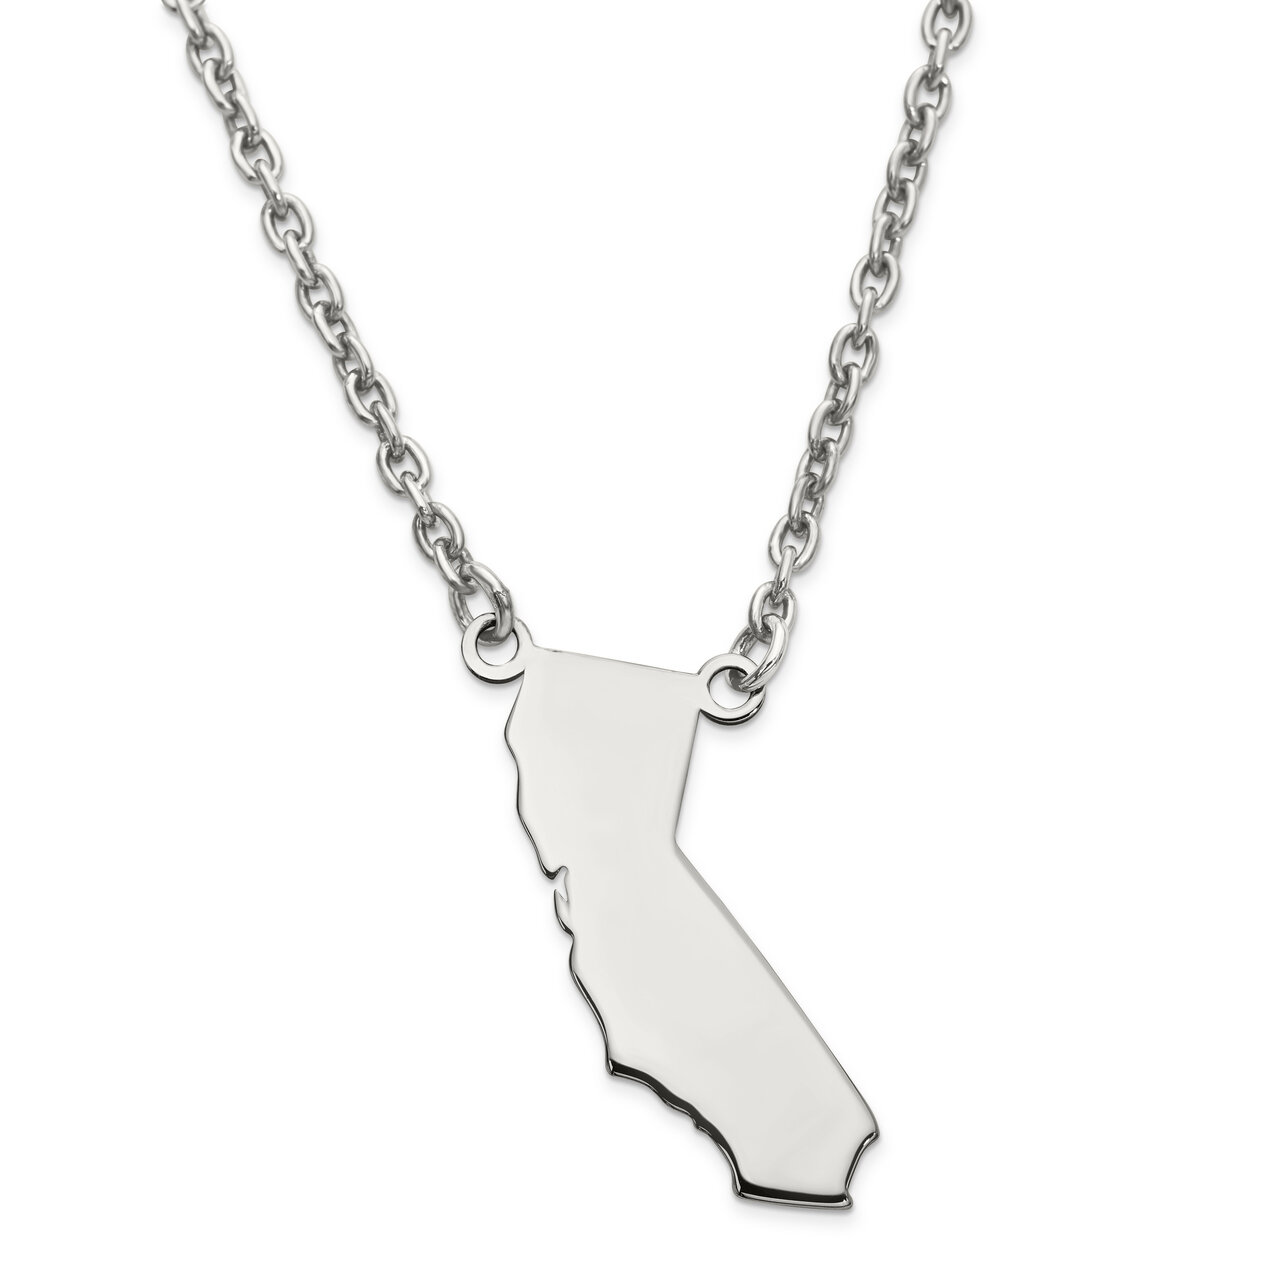 California State Pendant Necklace with Chain 14k White Gold Engravable XNA706W-CA